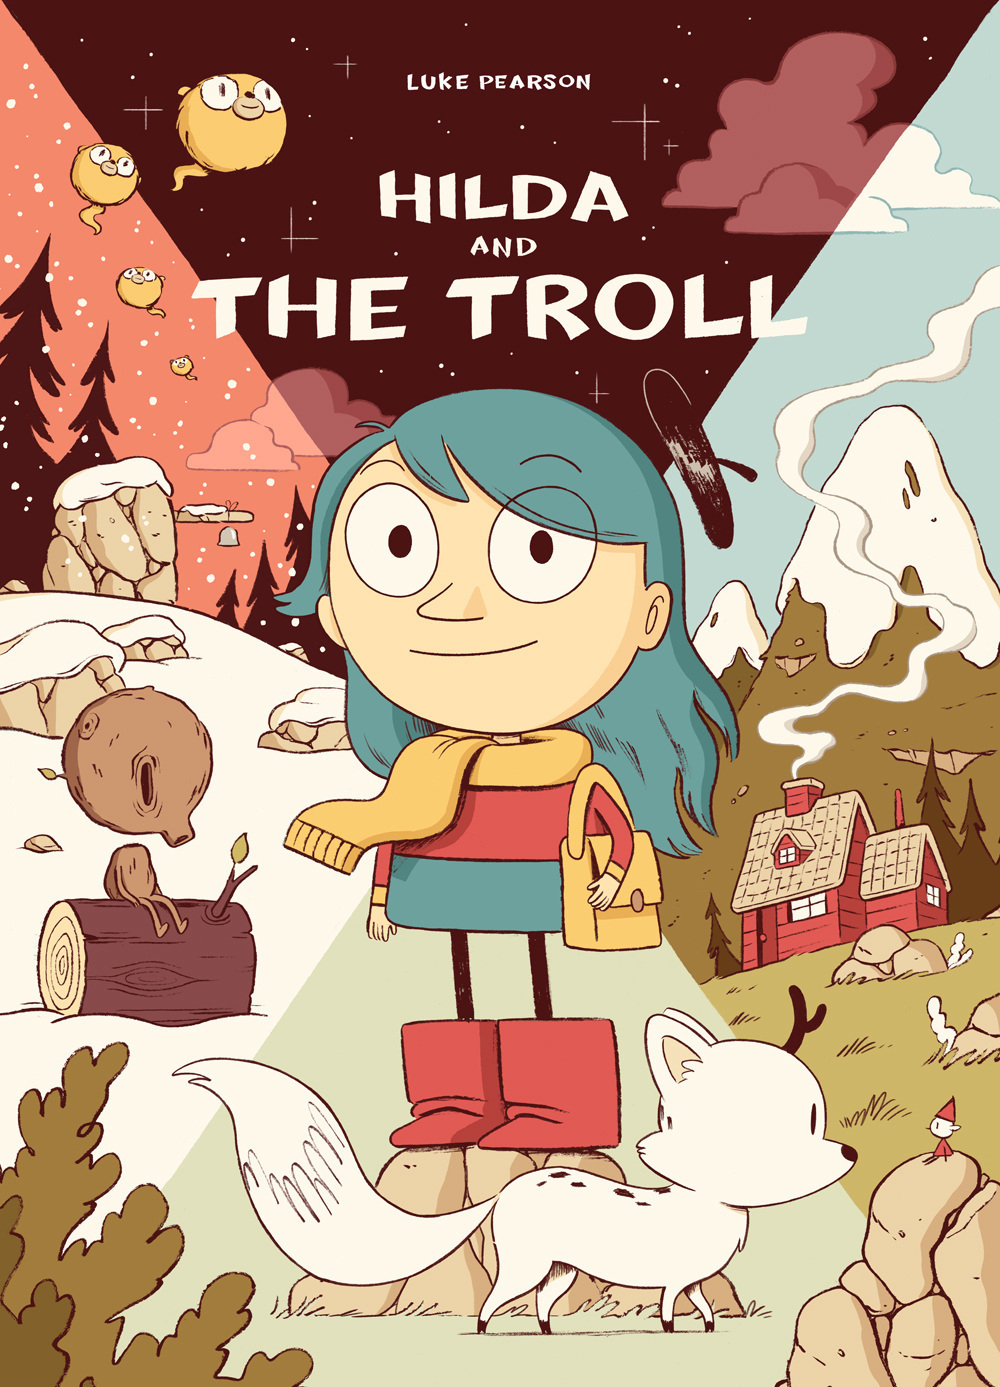 The cover the graphic novel Hilda and the Troll